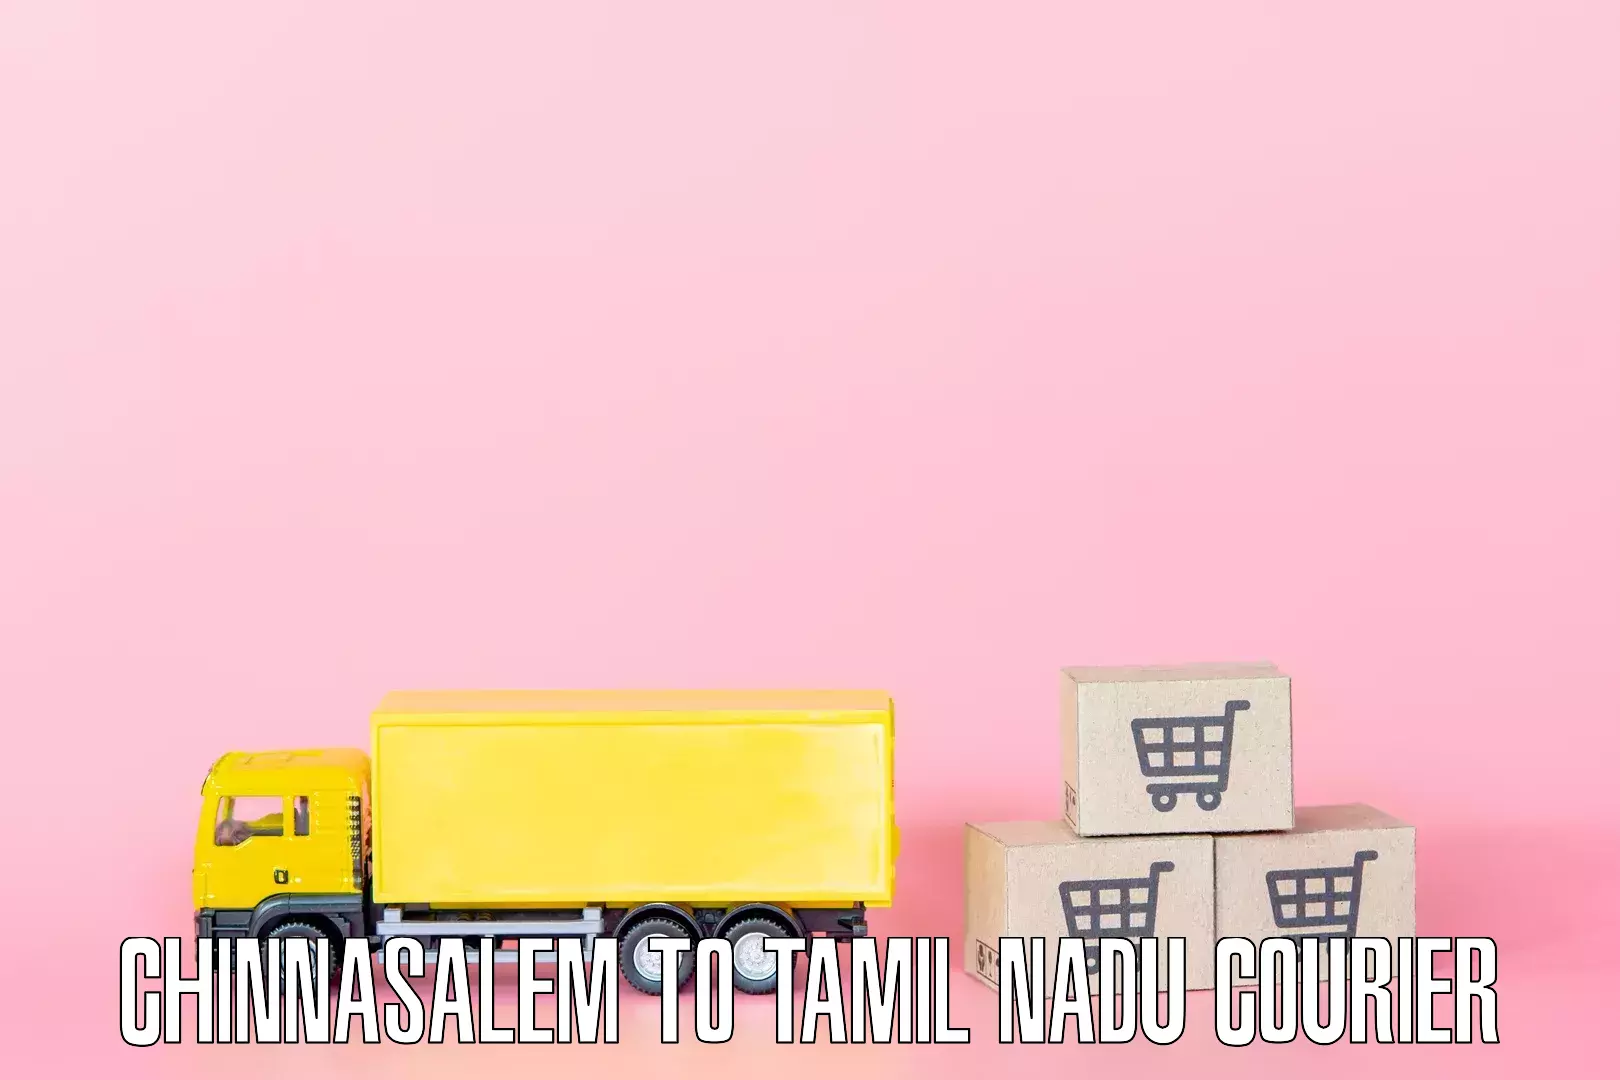 Cost-effective moving options in Chinnasalem to Tamil Nadu